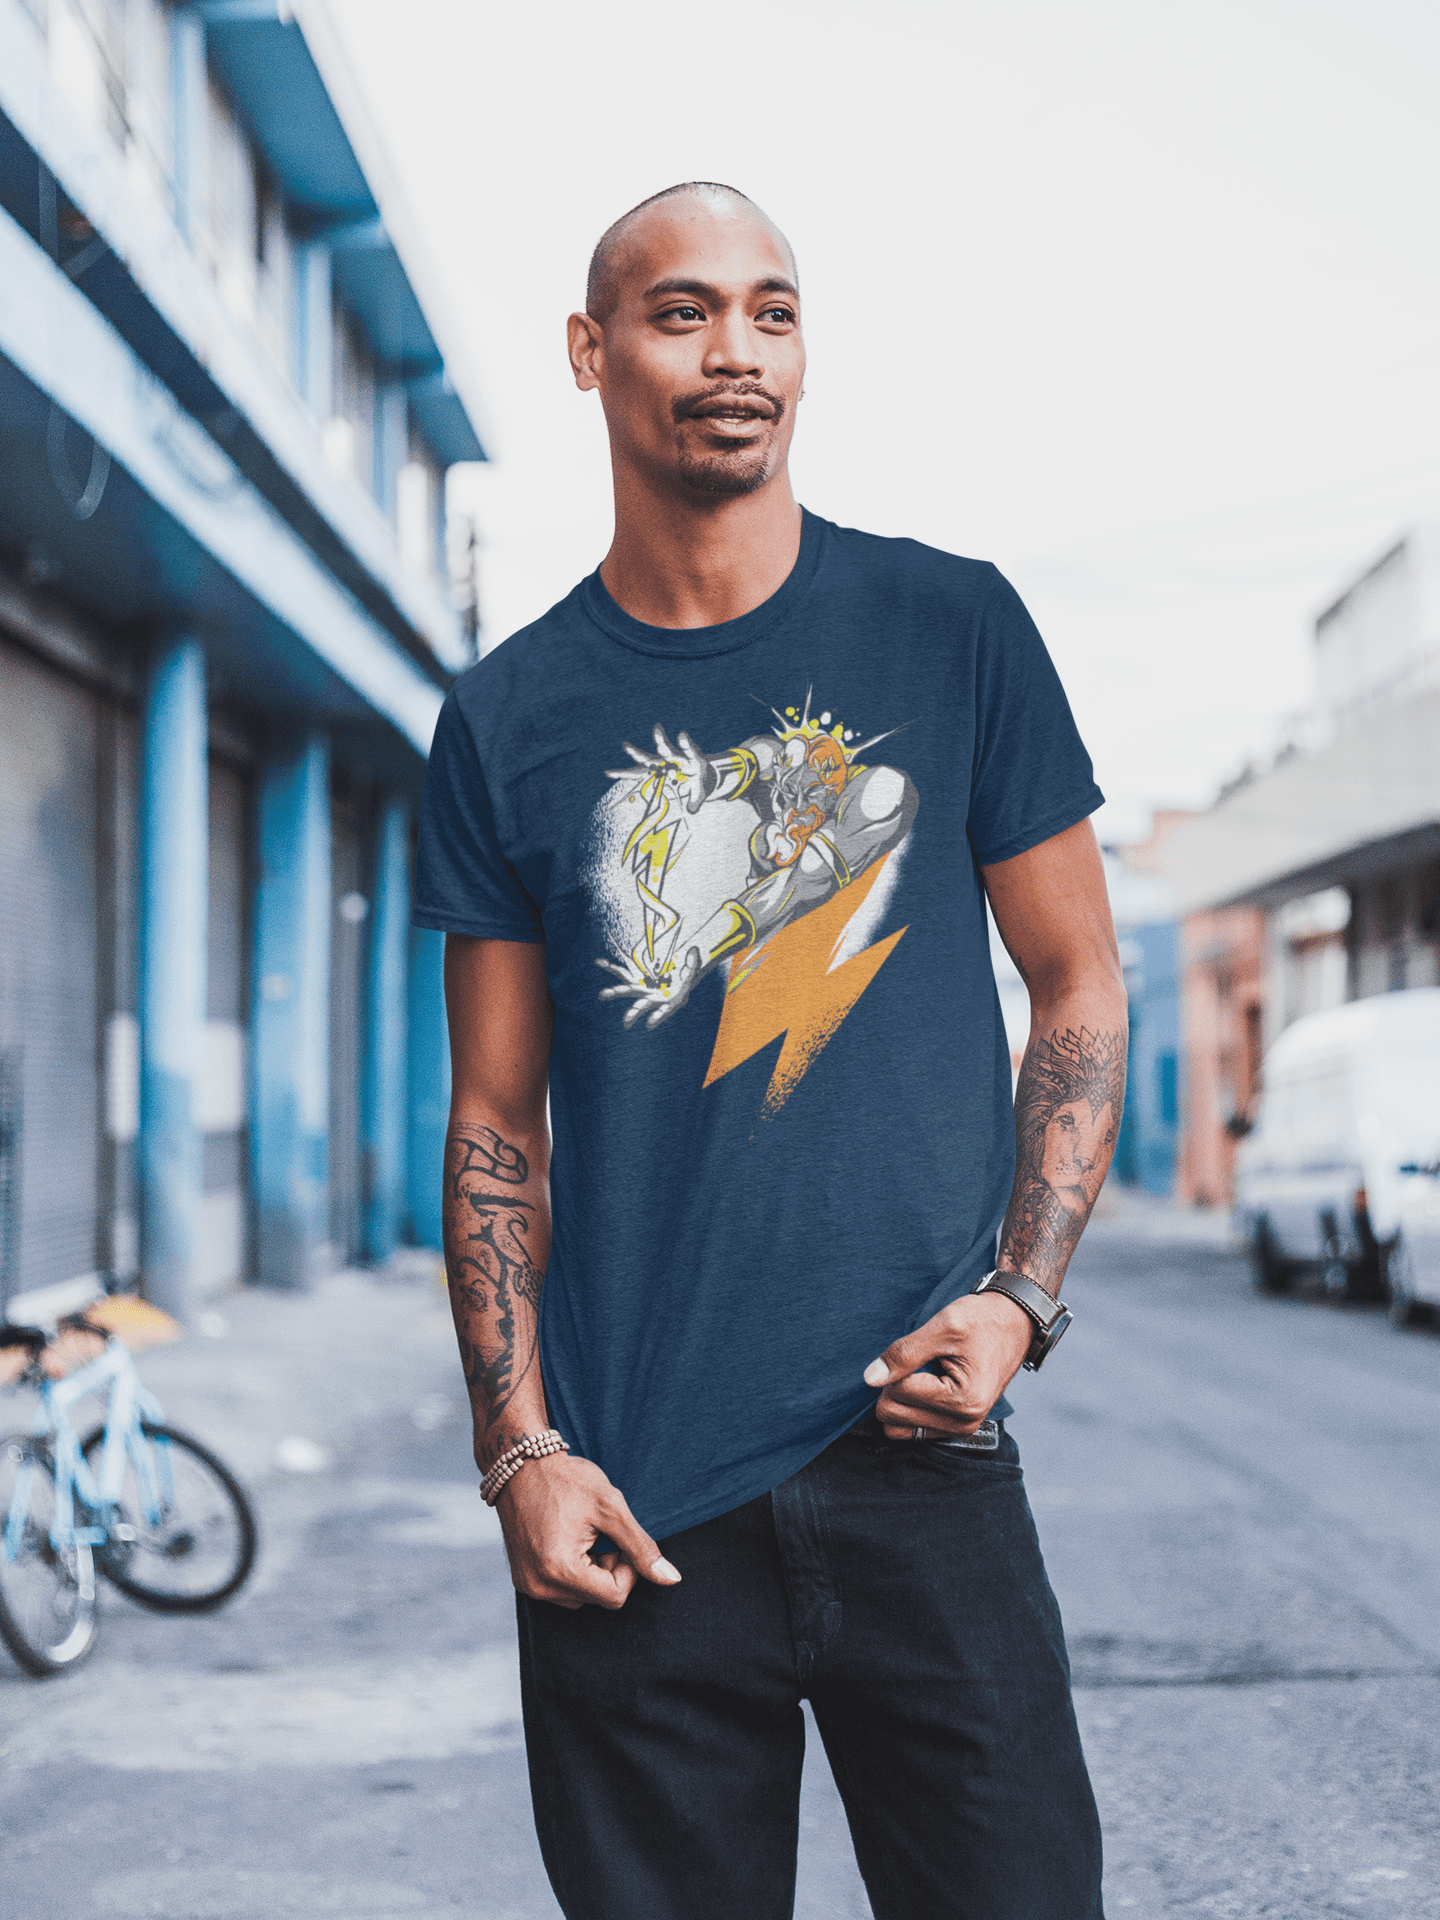 Cool tattooed man posing on the street wearing a navy colored bitcoin t-shirt.